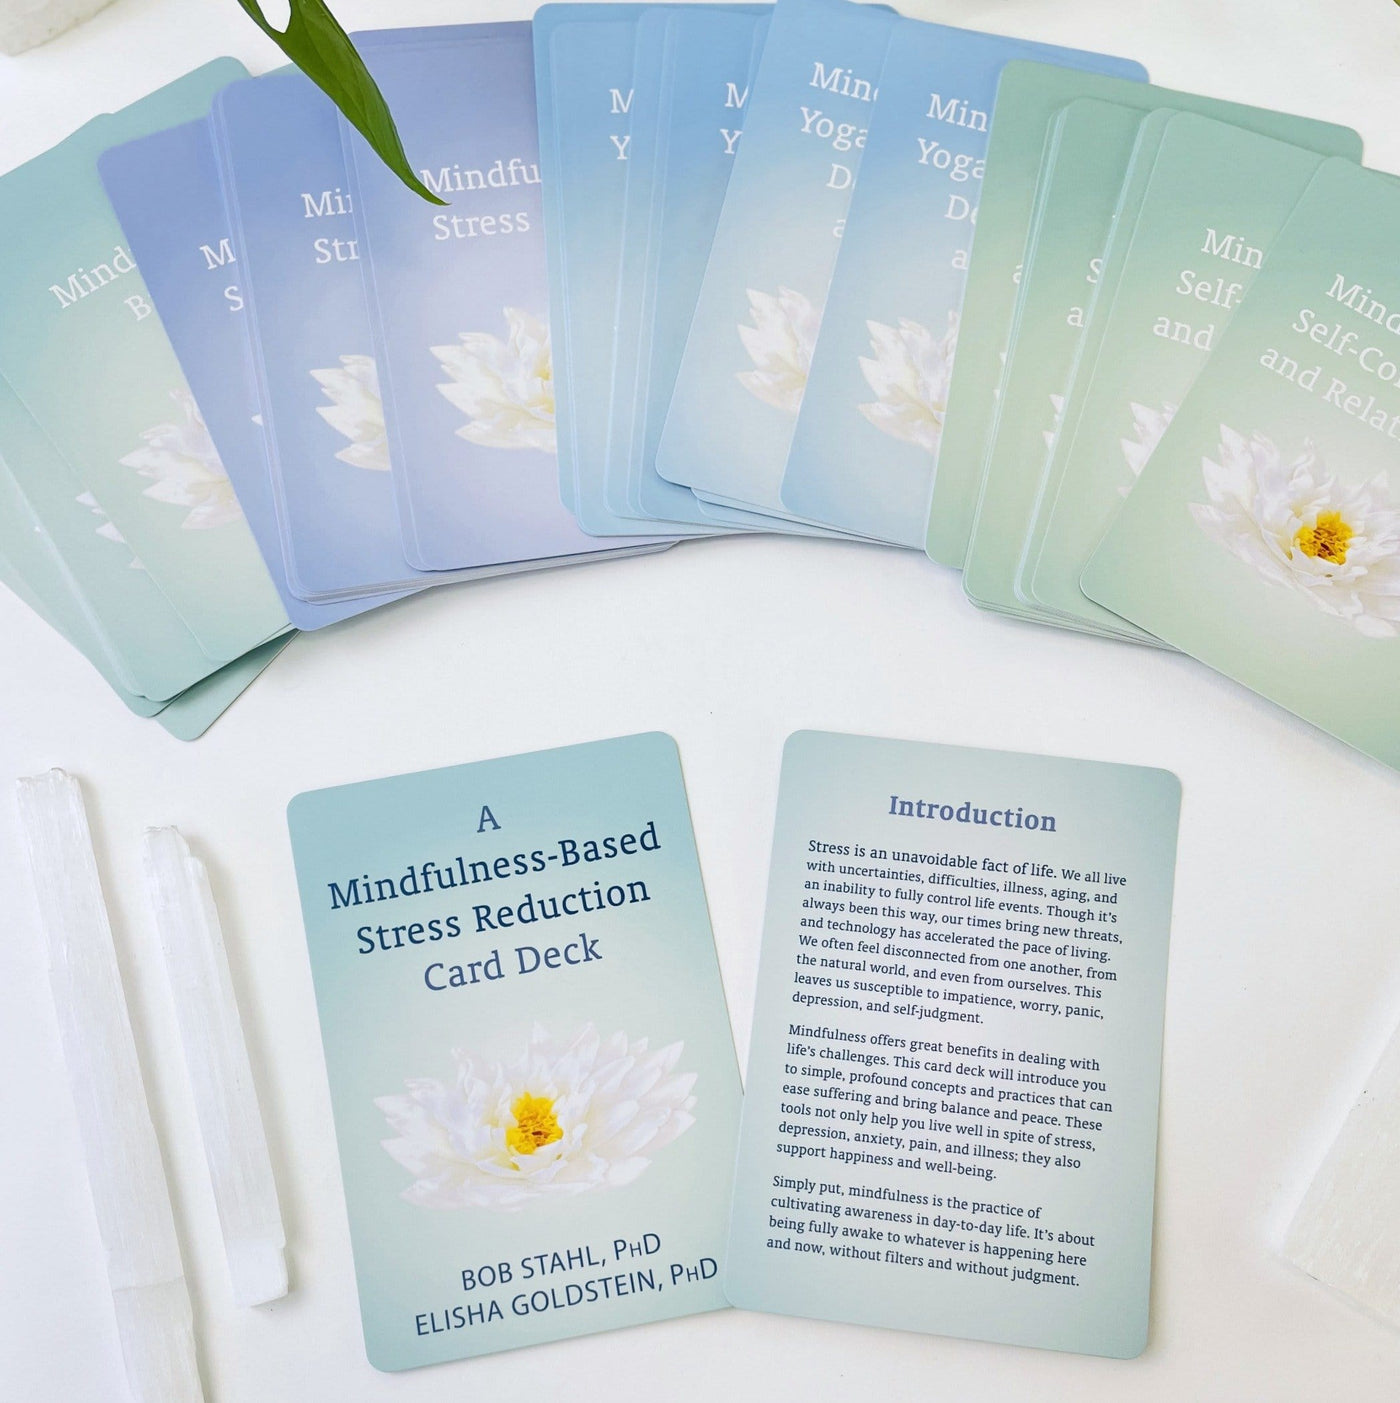 A Mindfulness-Based Stress Reduction Card Deck - Title, introduction and card deck expanded.